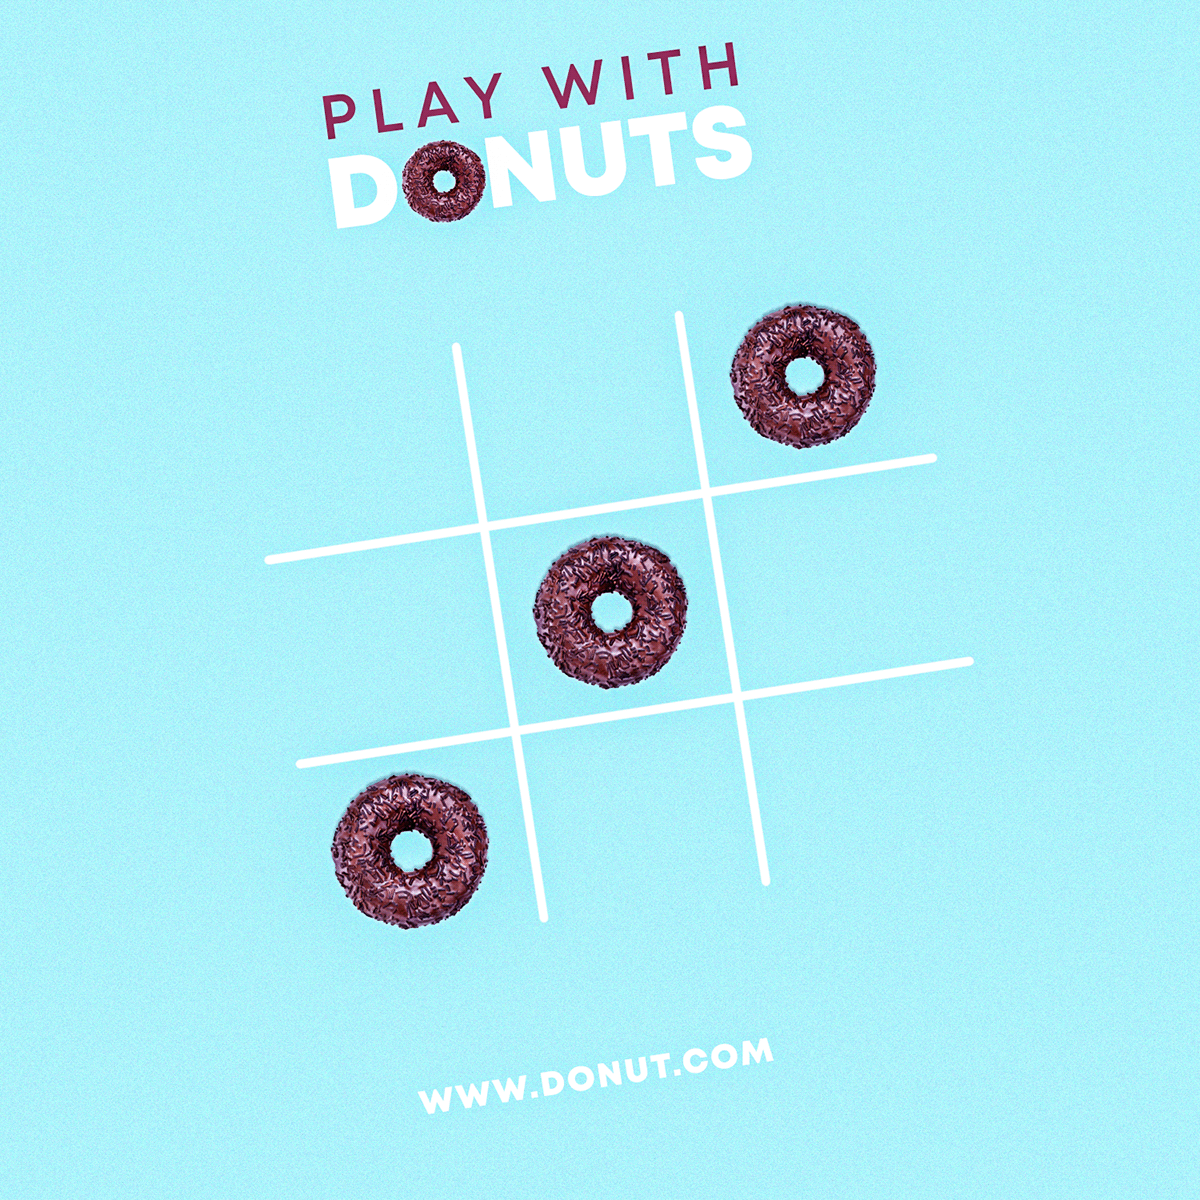 ads Advertising  art direction  campaign creative donults donut design Food  Food Advertising Food Creative Ads